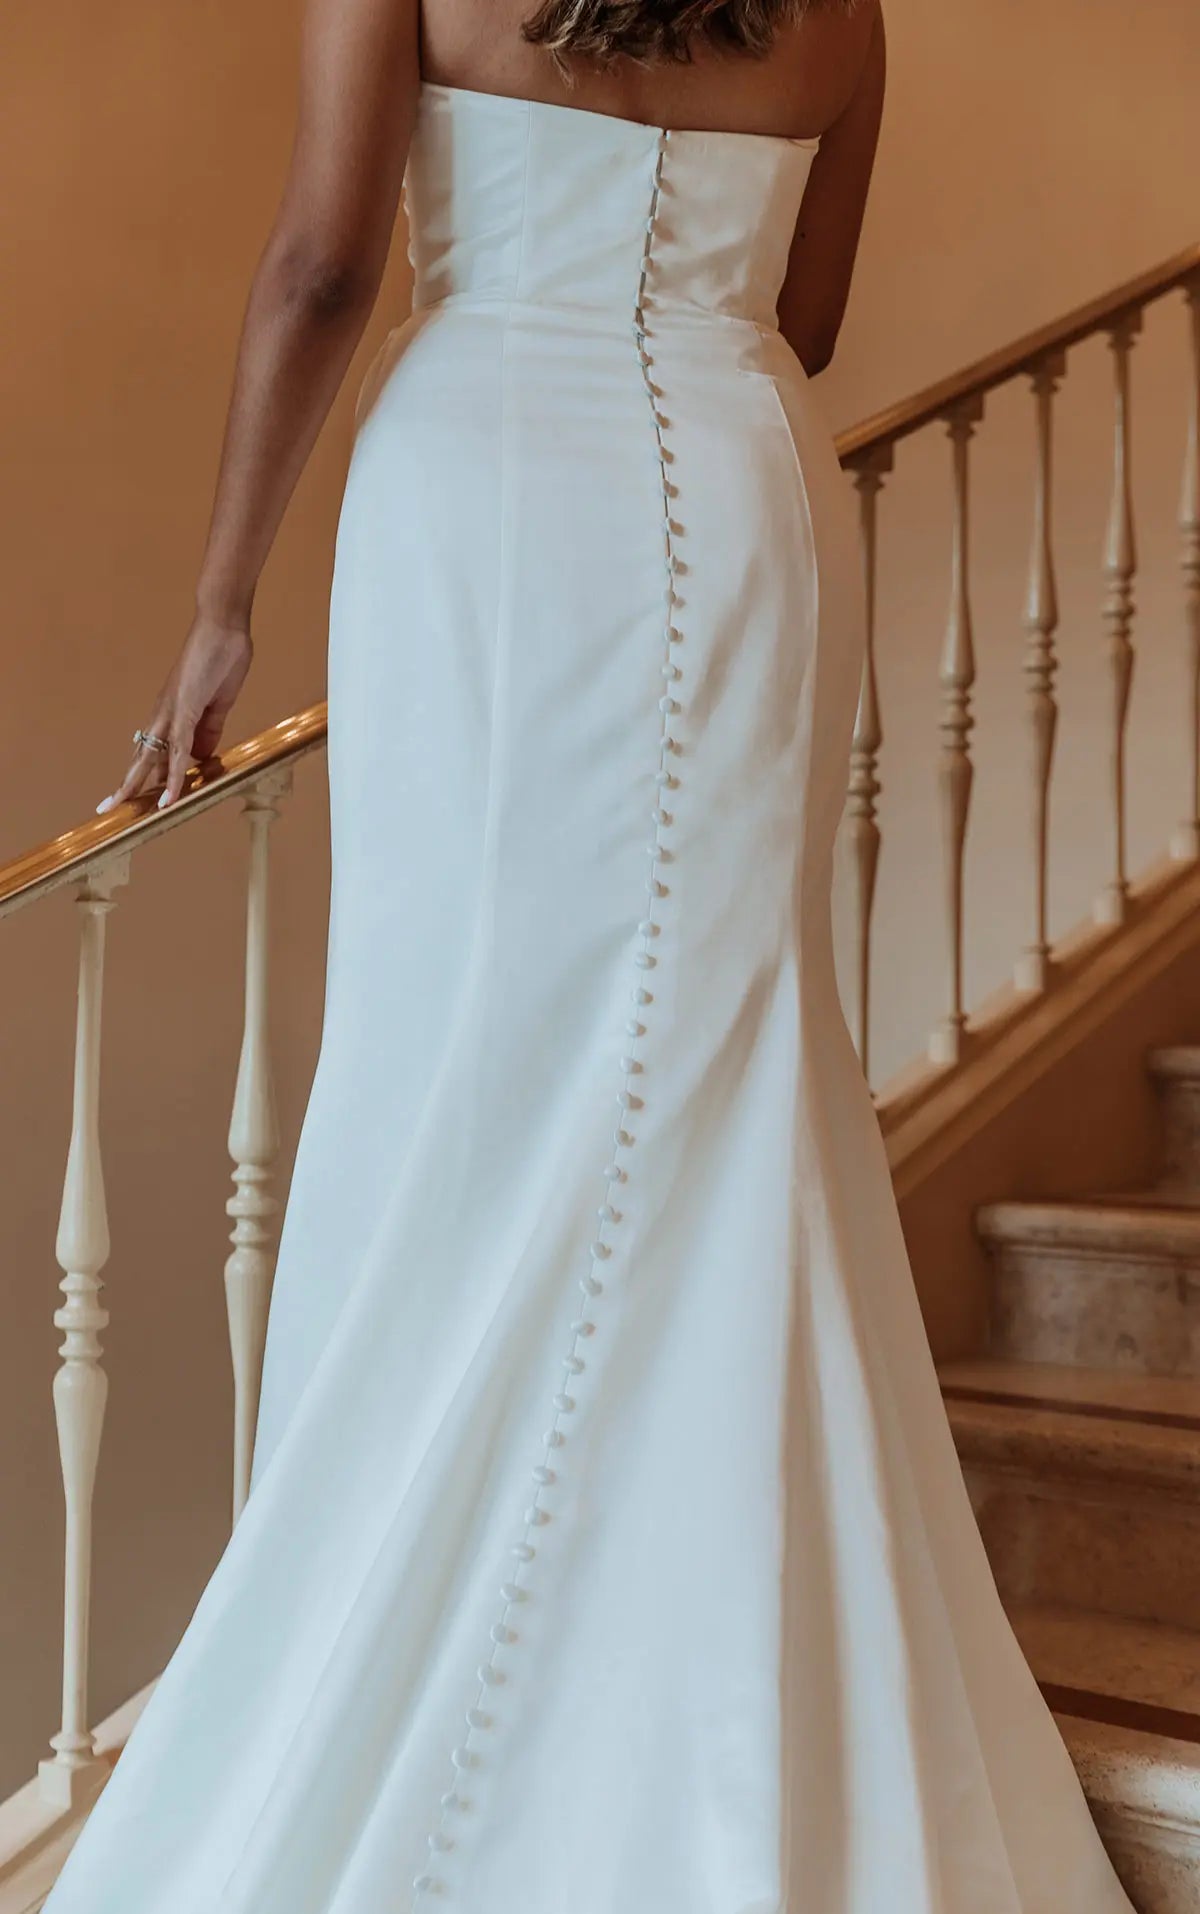 Chic Sheath Skirt To Complete The Grand Satin Column Gown Look | Philly Bridal